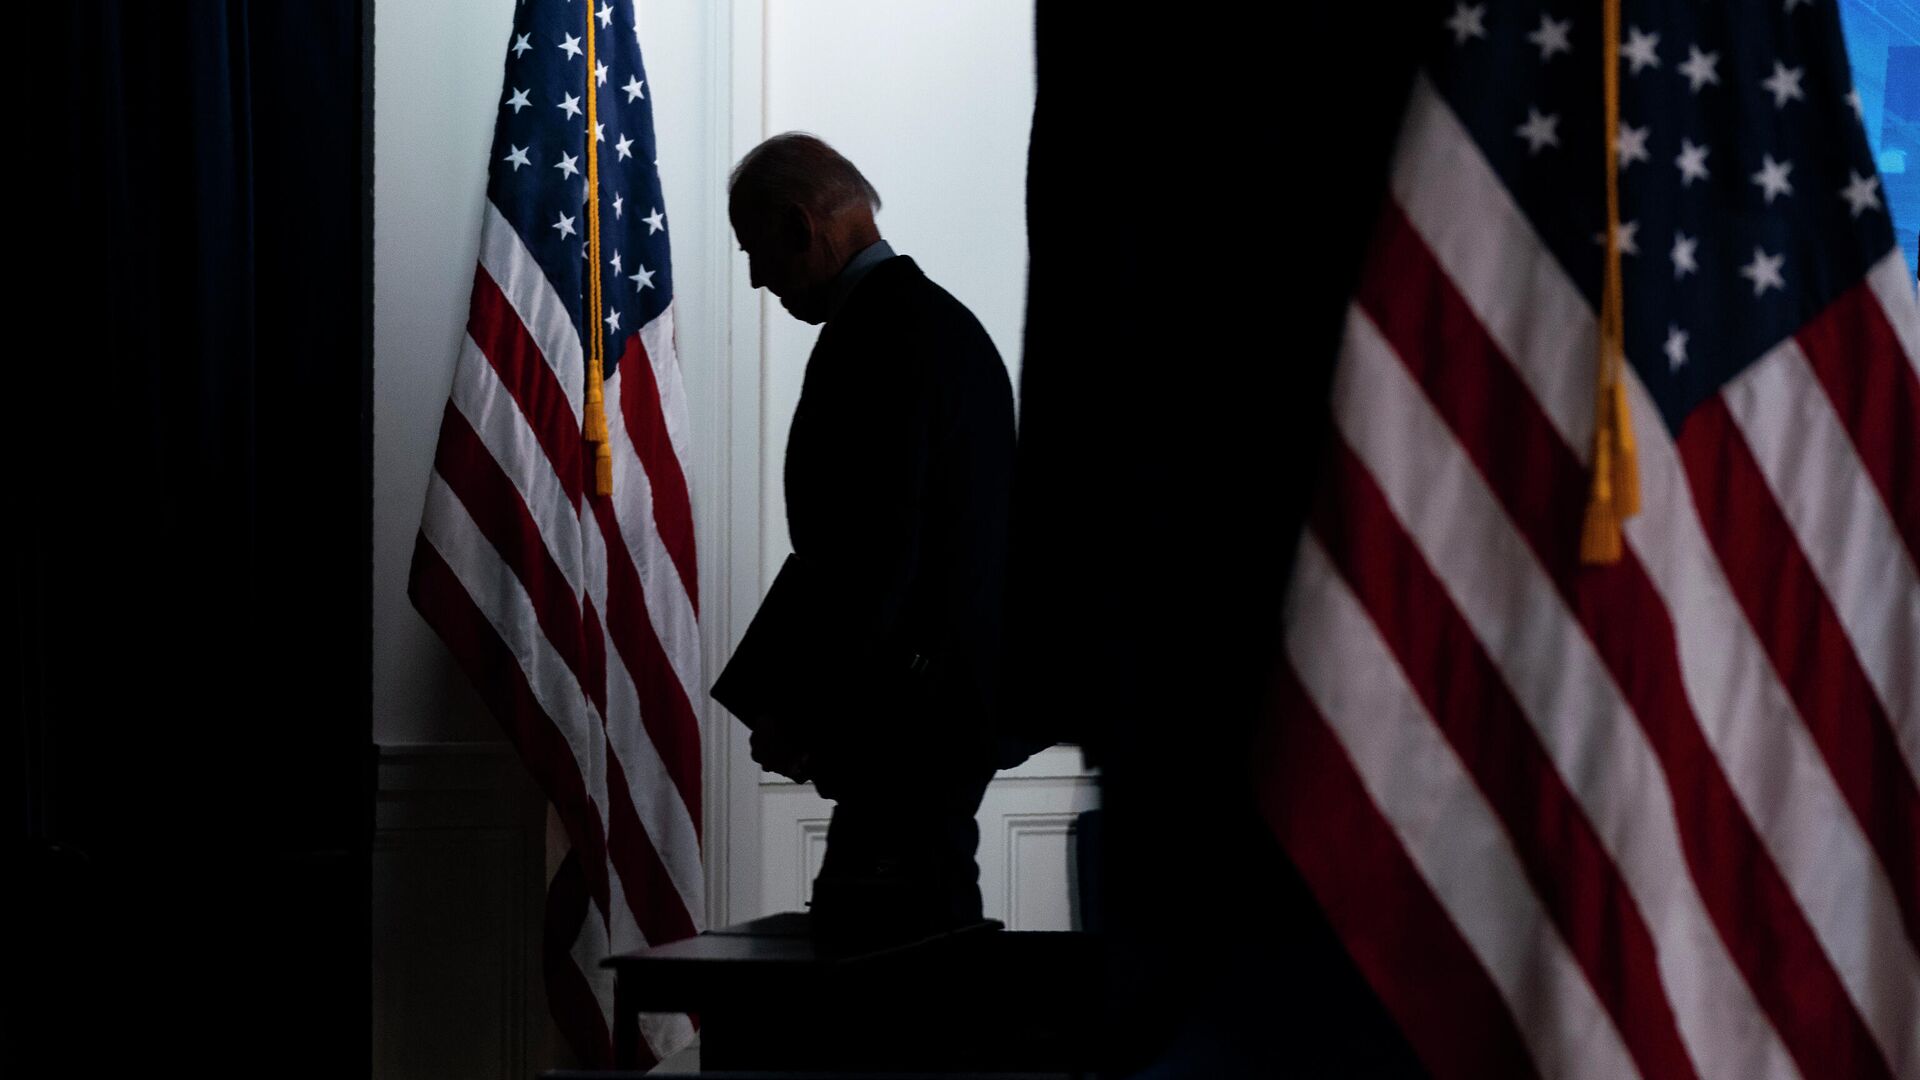 President Joe Biden walks away after speaking about COVID-19 vaccinations at the White House, Wednesday, April 21, 2021, in Washington - Sputnik International, 1920, 19.02.2022